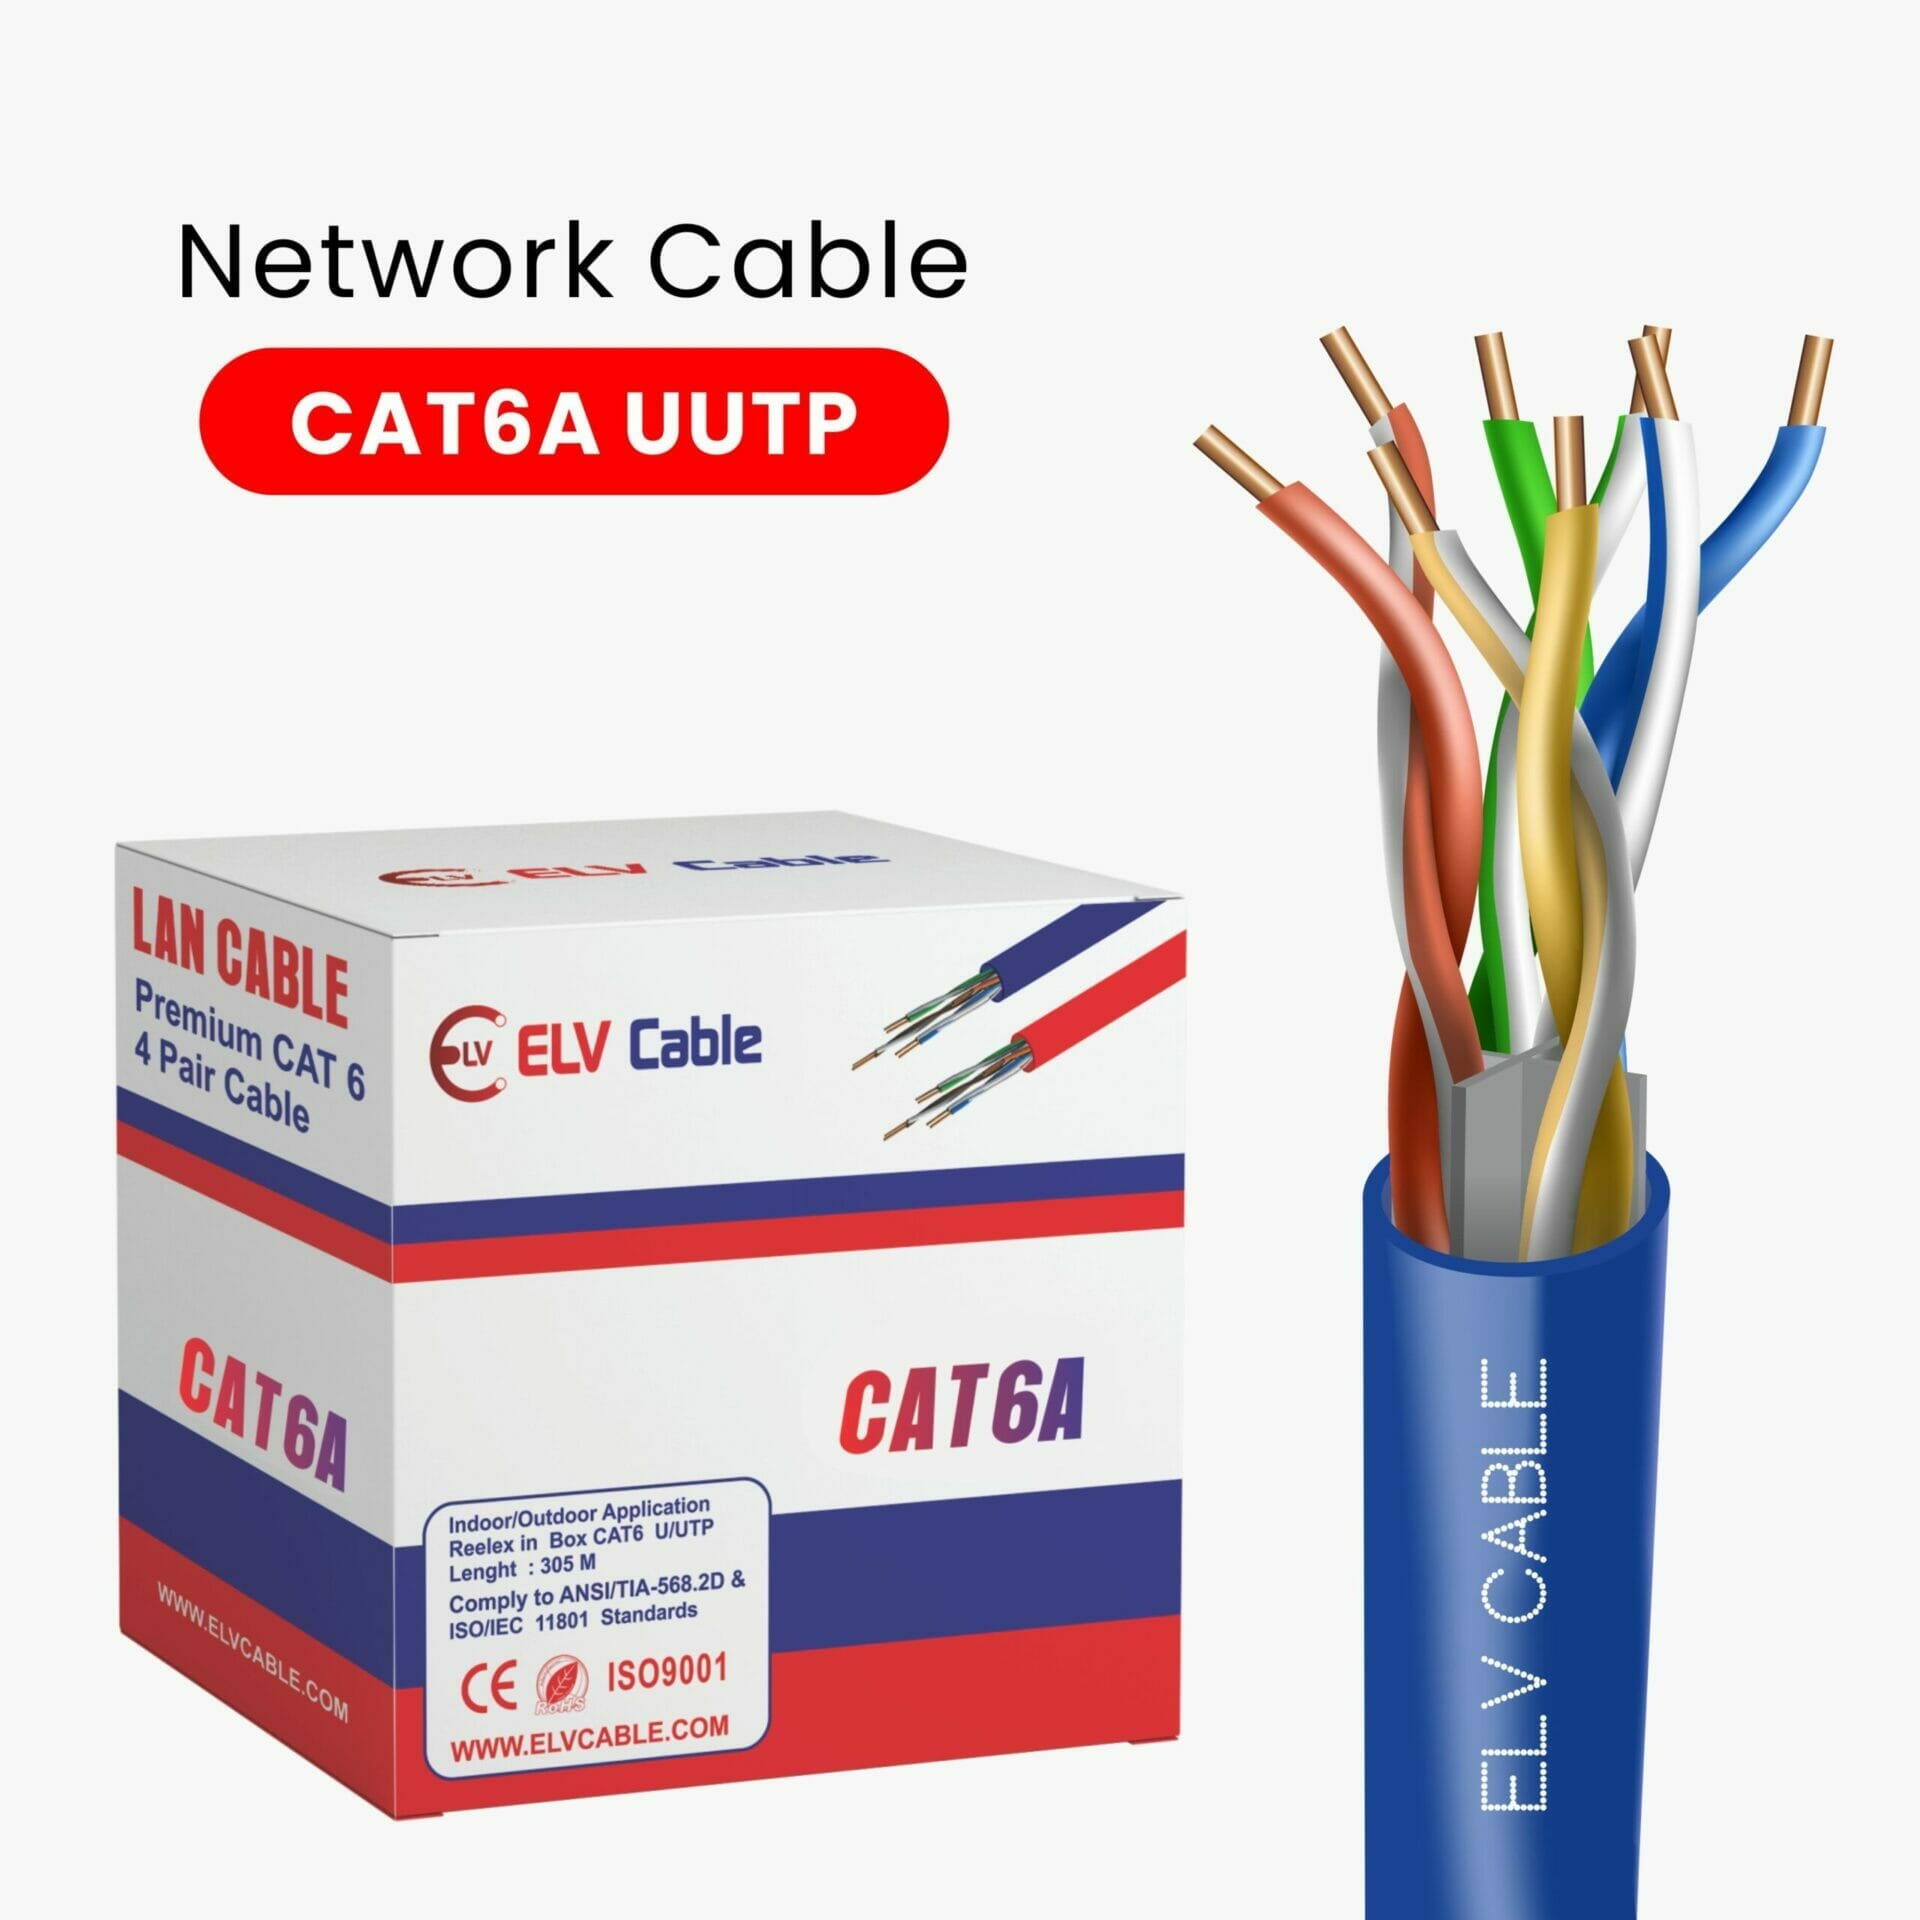 tmt global elv cable fahad cables industry fze products range network cable cat3 cat5e cable cat6 cable cat6a cable cat7 cable cat8 cable full copper LSZH and ethernet cables